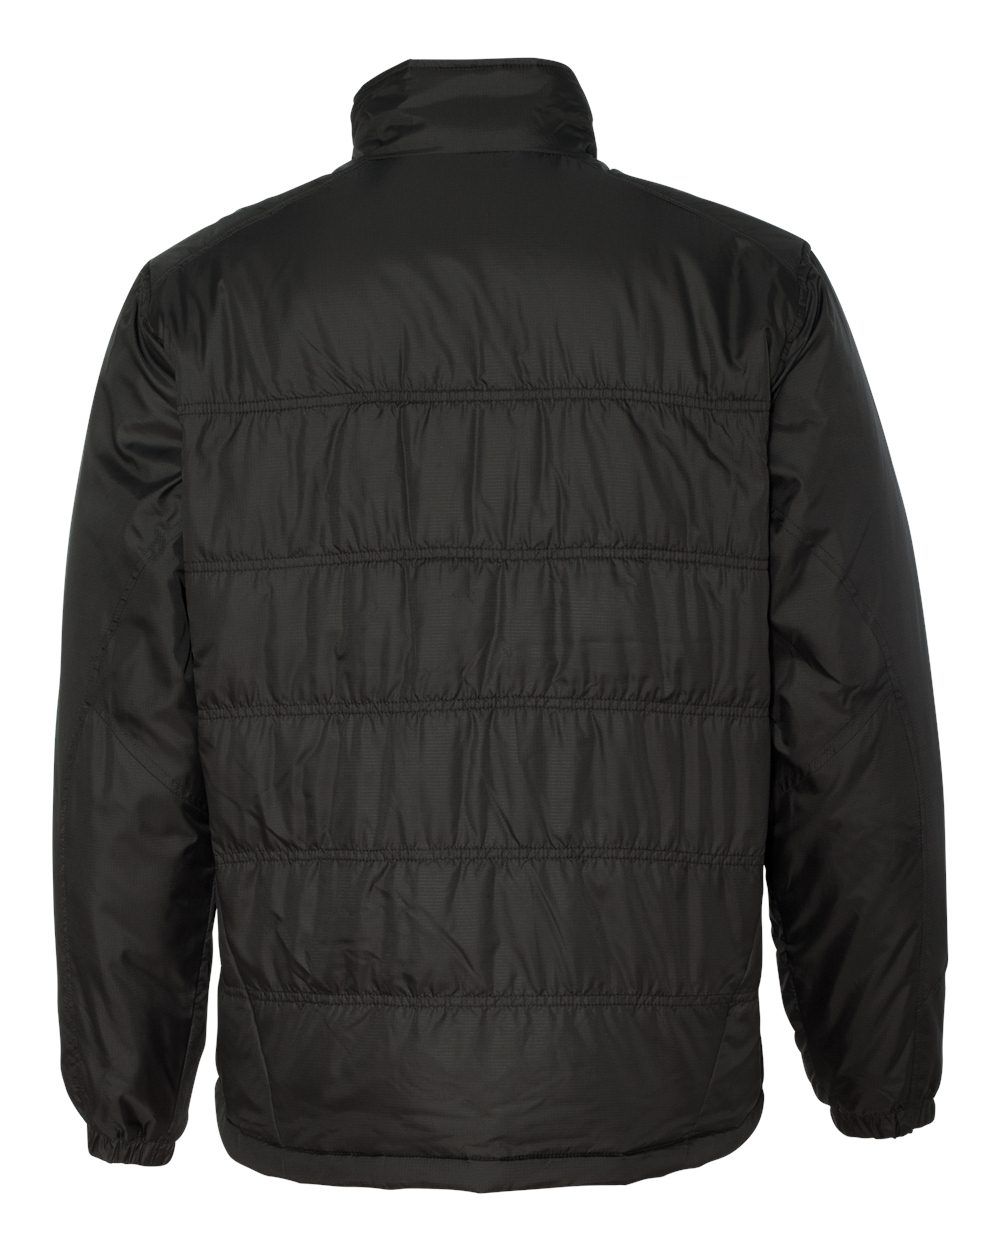 DRI DUCK 5321 - Eclipse Thinsulate Lined Puffer Jacket $82.49